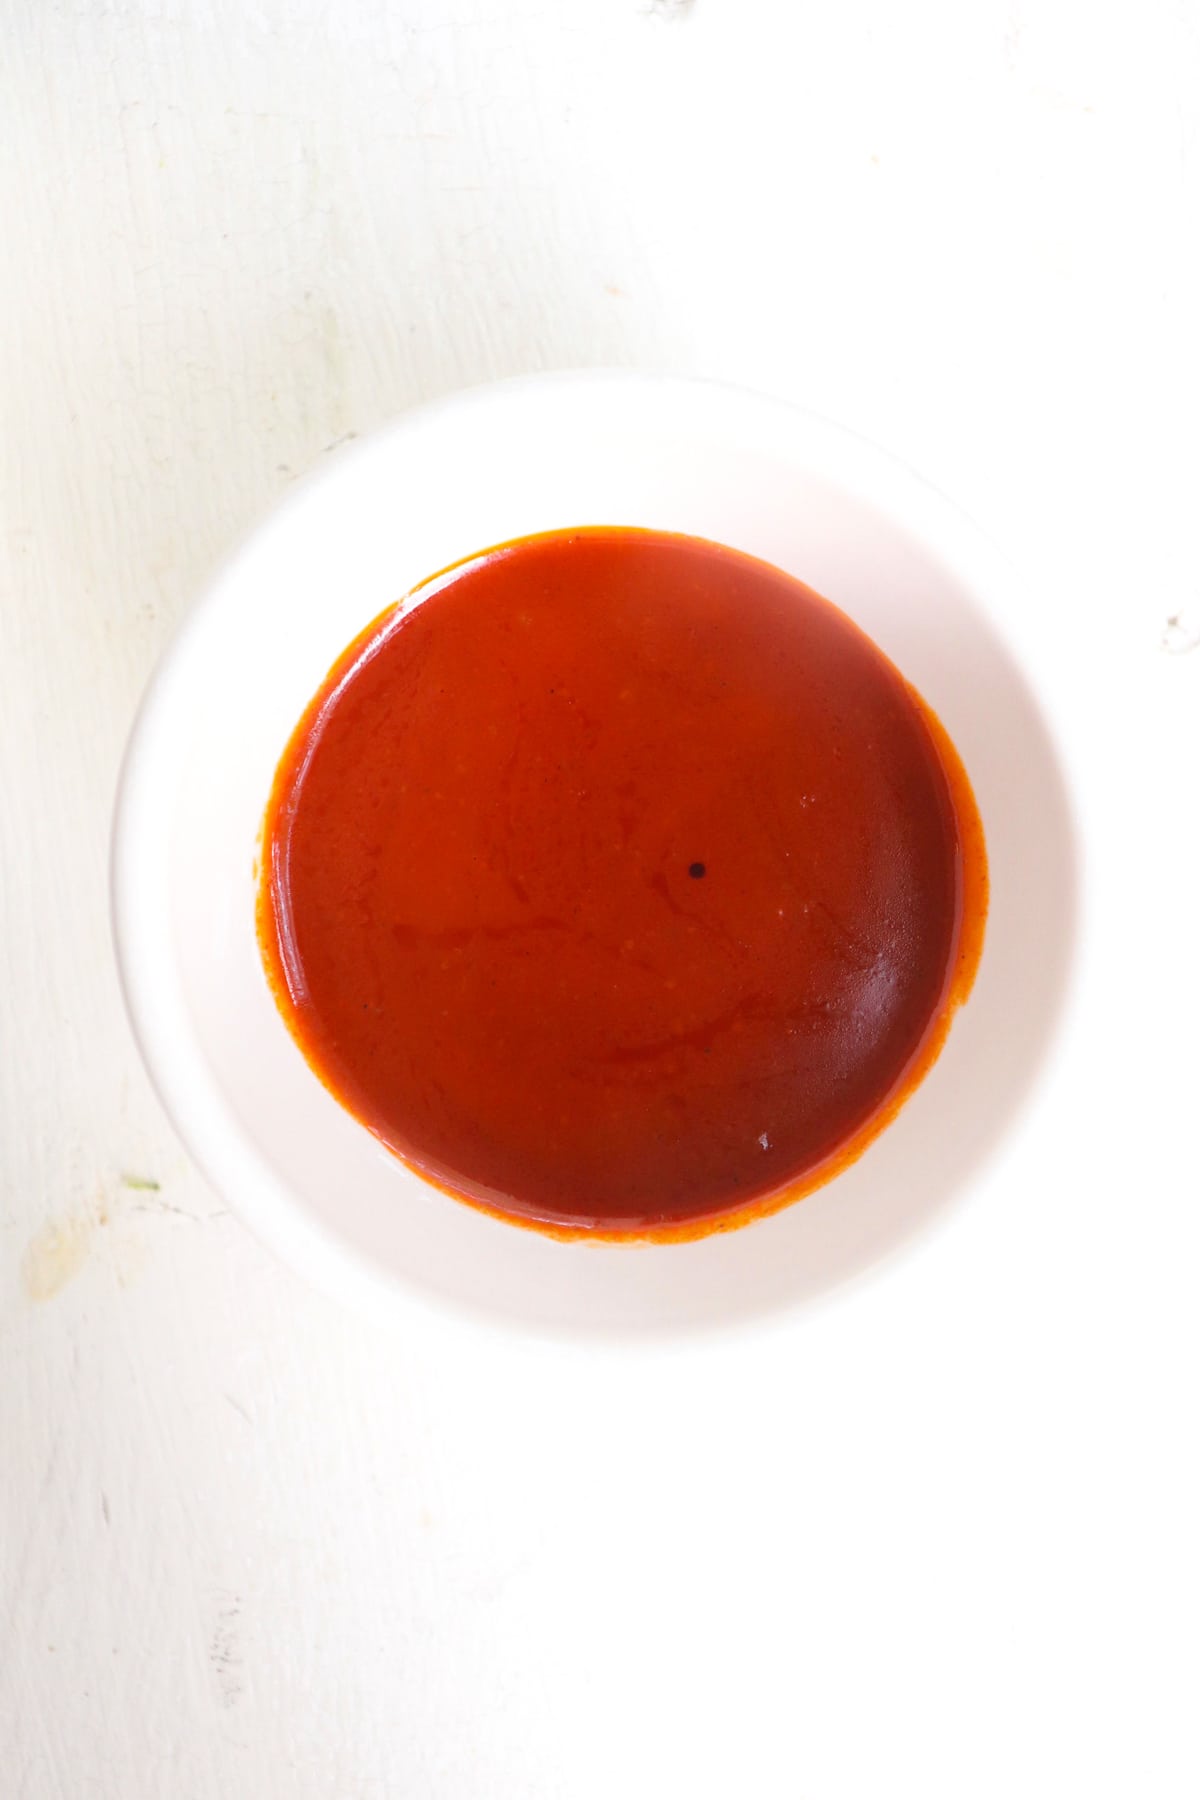 gochujang paste in a small white bowl.